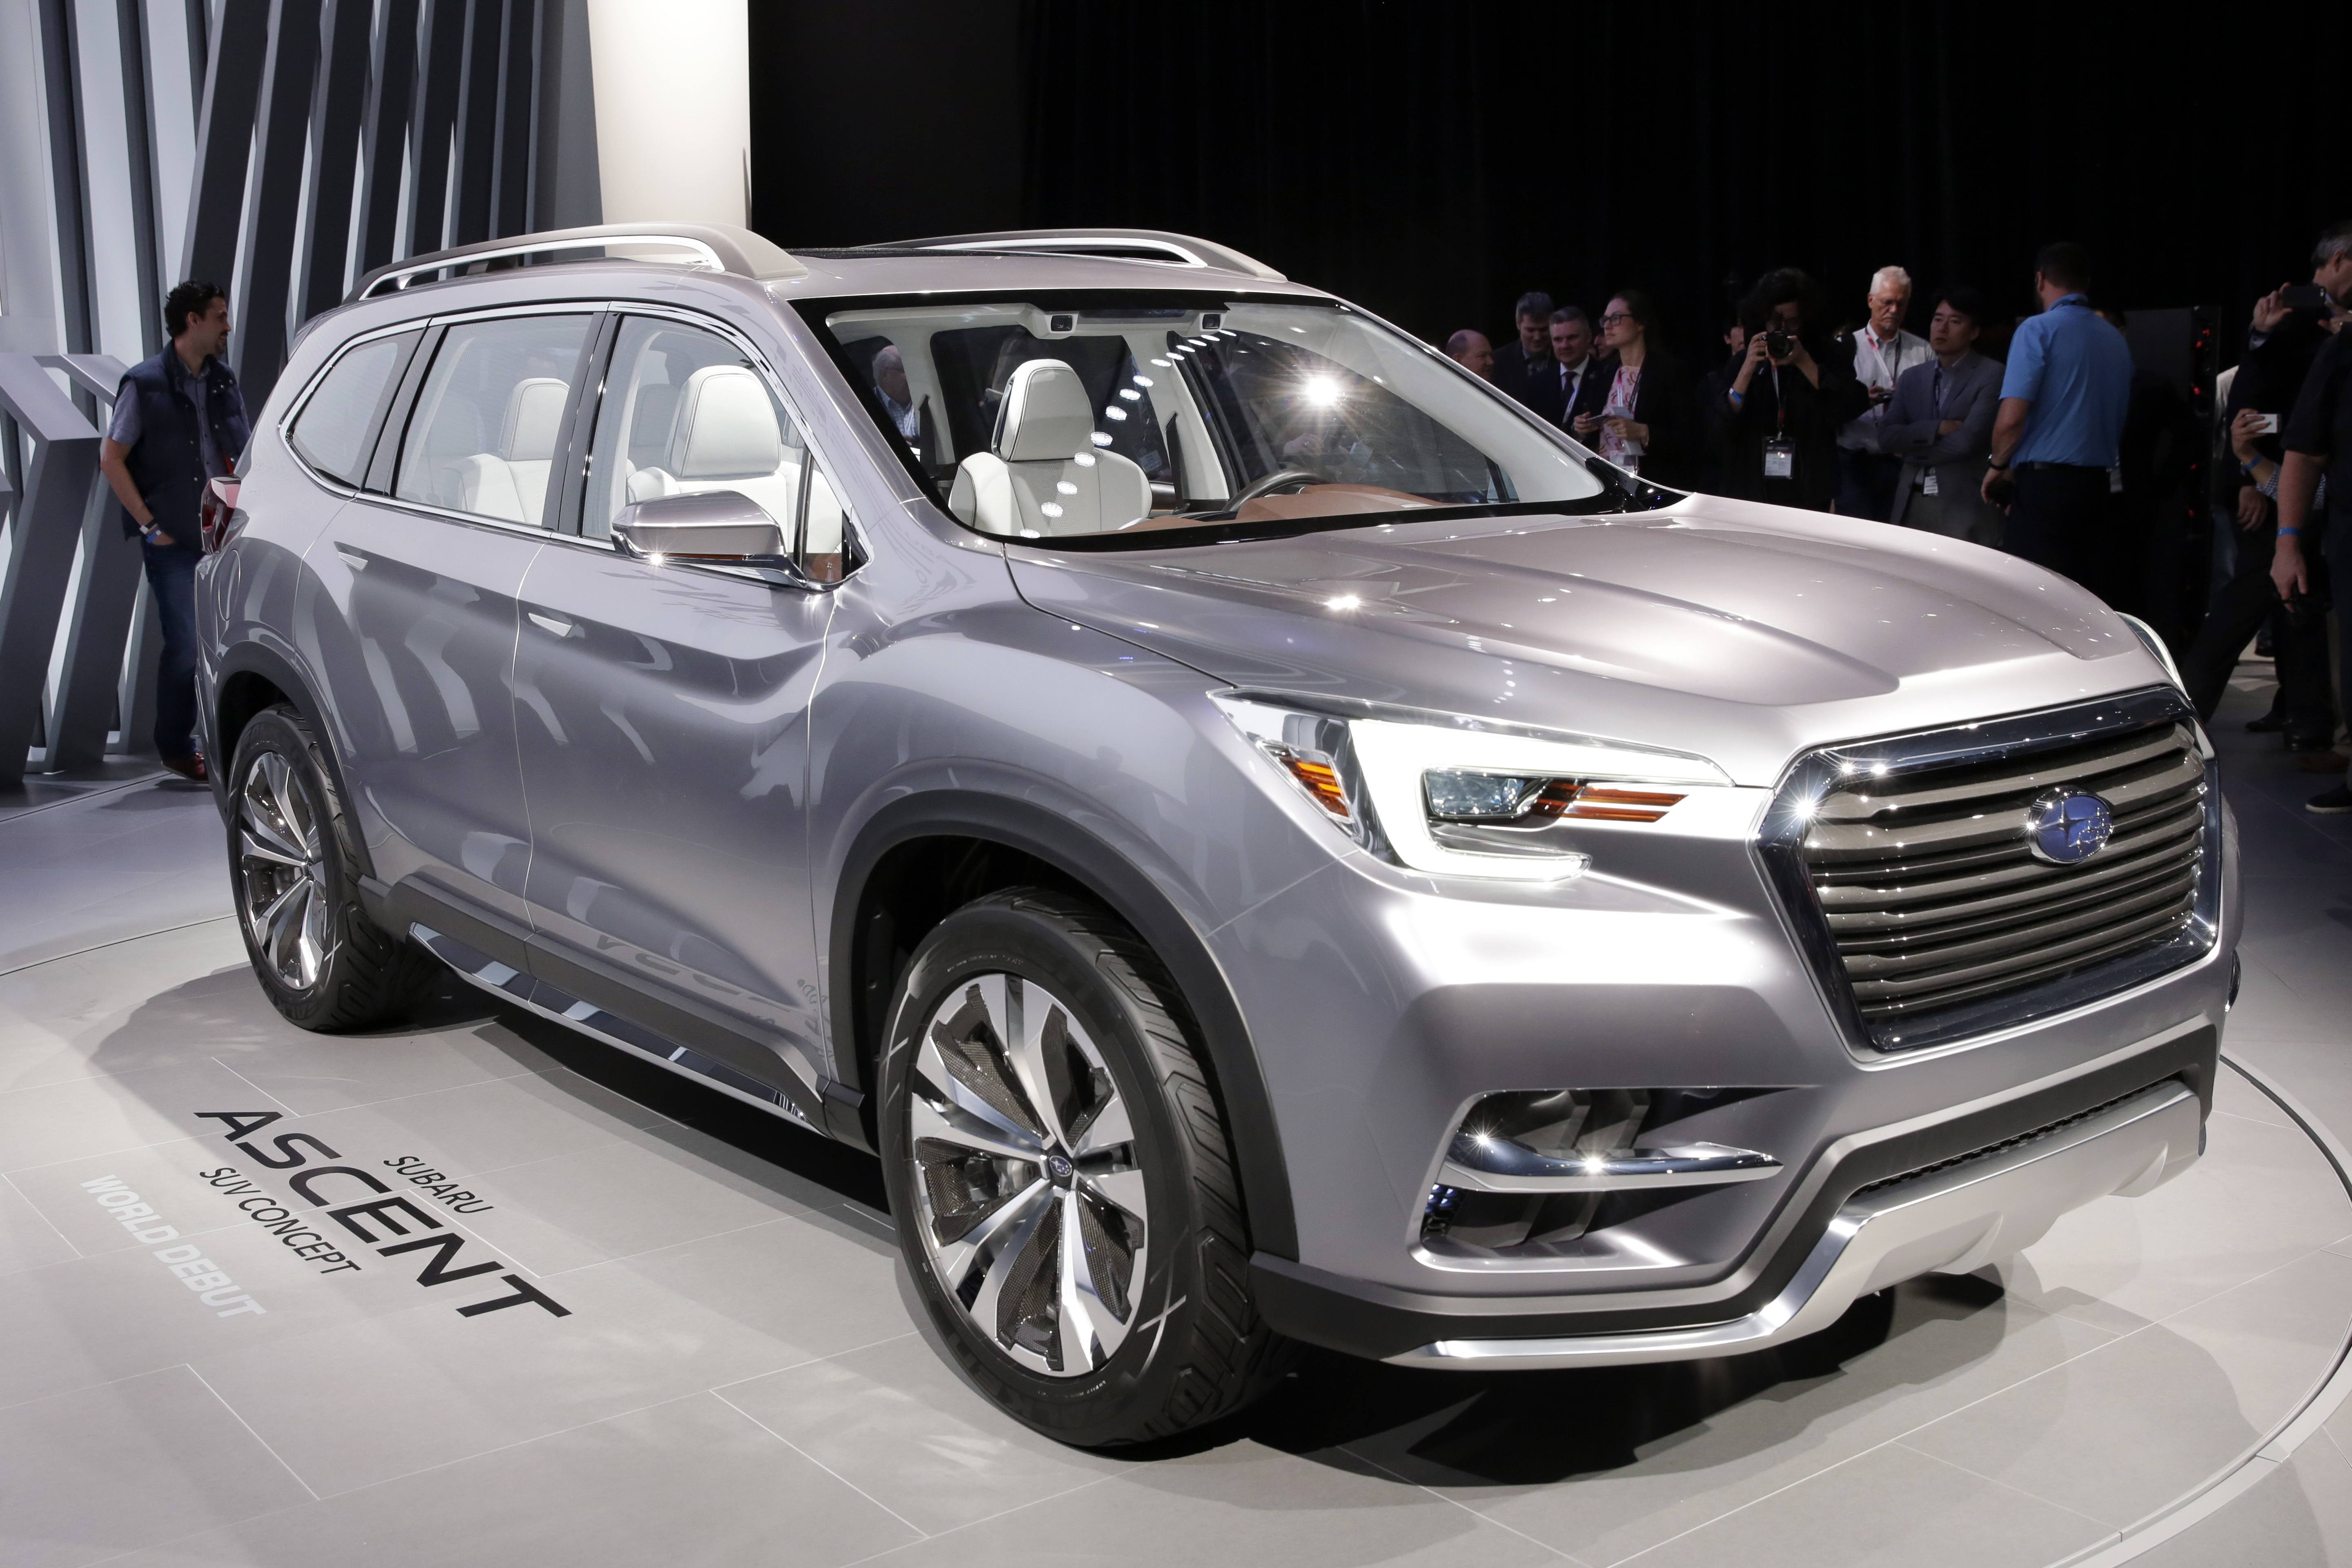 The Subaru Ascent concept car is shown during a media preview at the New Yo...